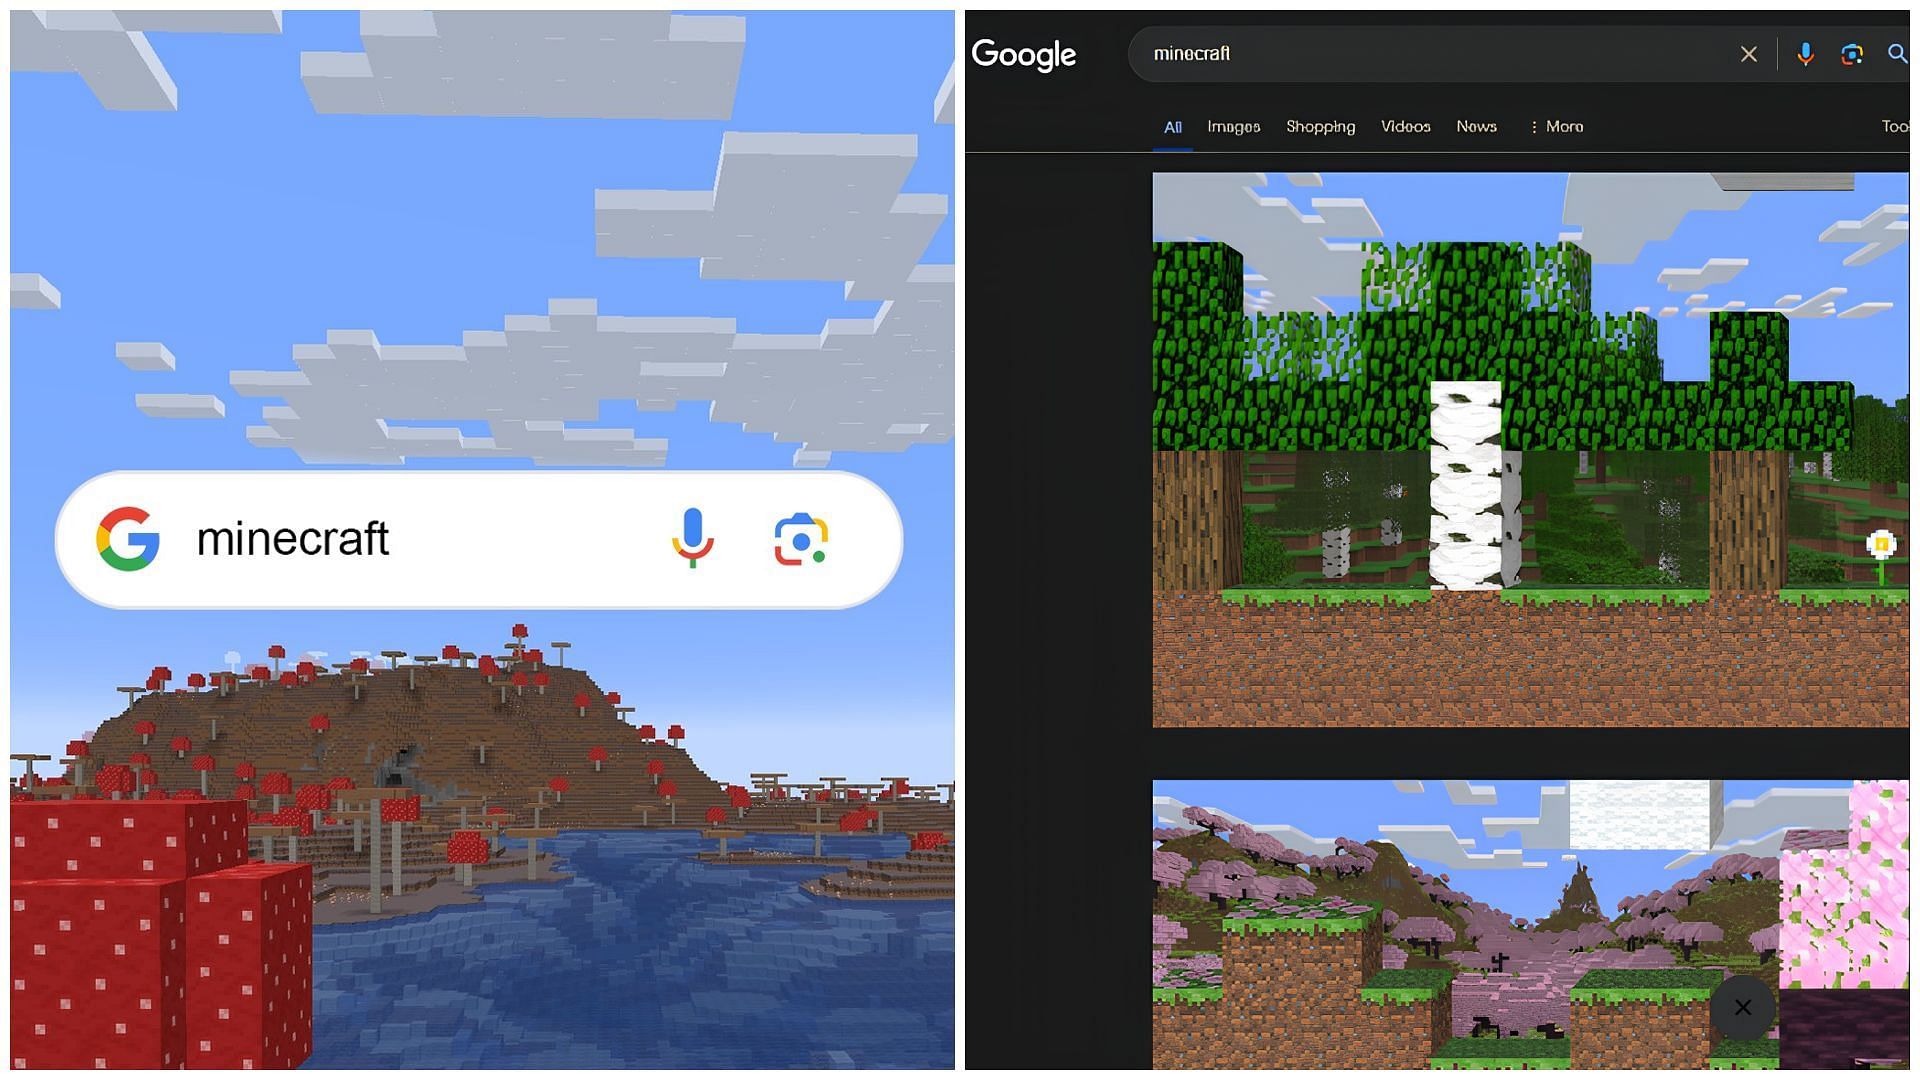 Google Minecraft easter egg: All you need to know